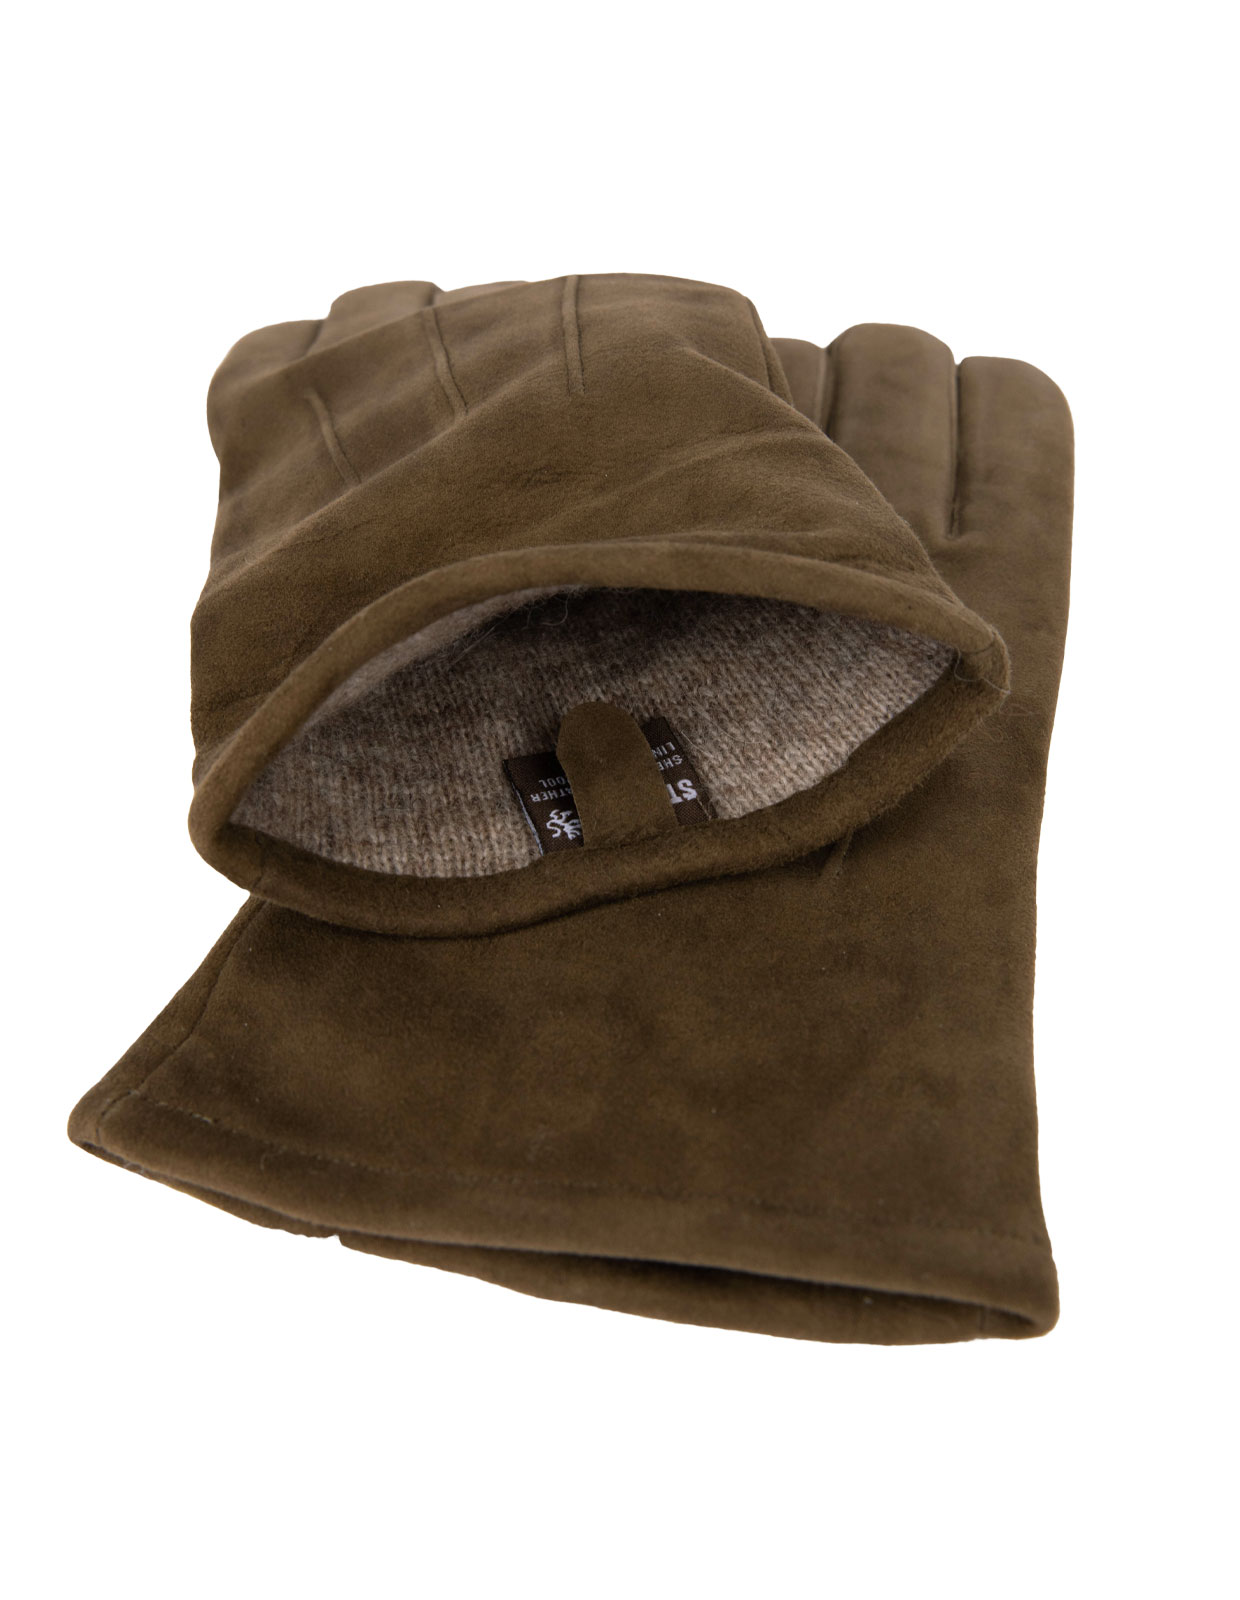 Classic Suede Gloves Olive Green Stl 9.5